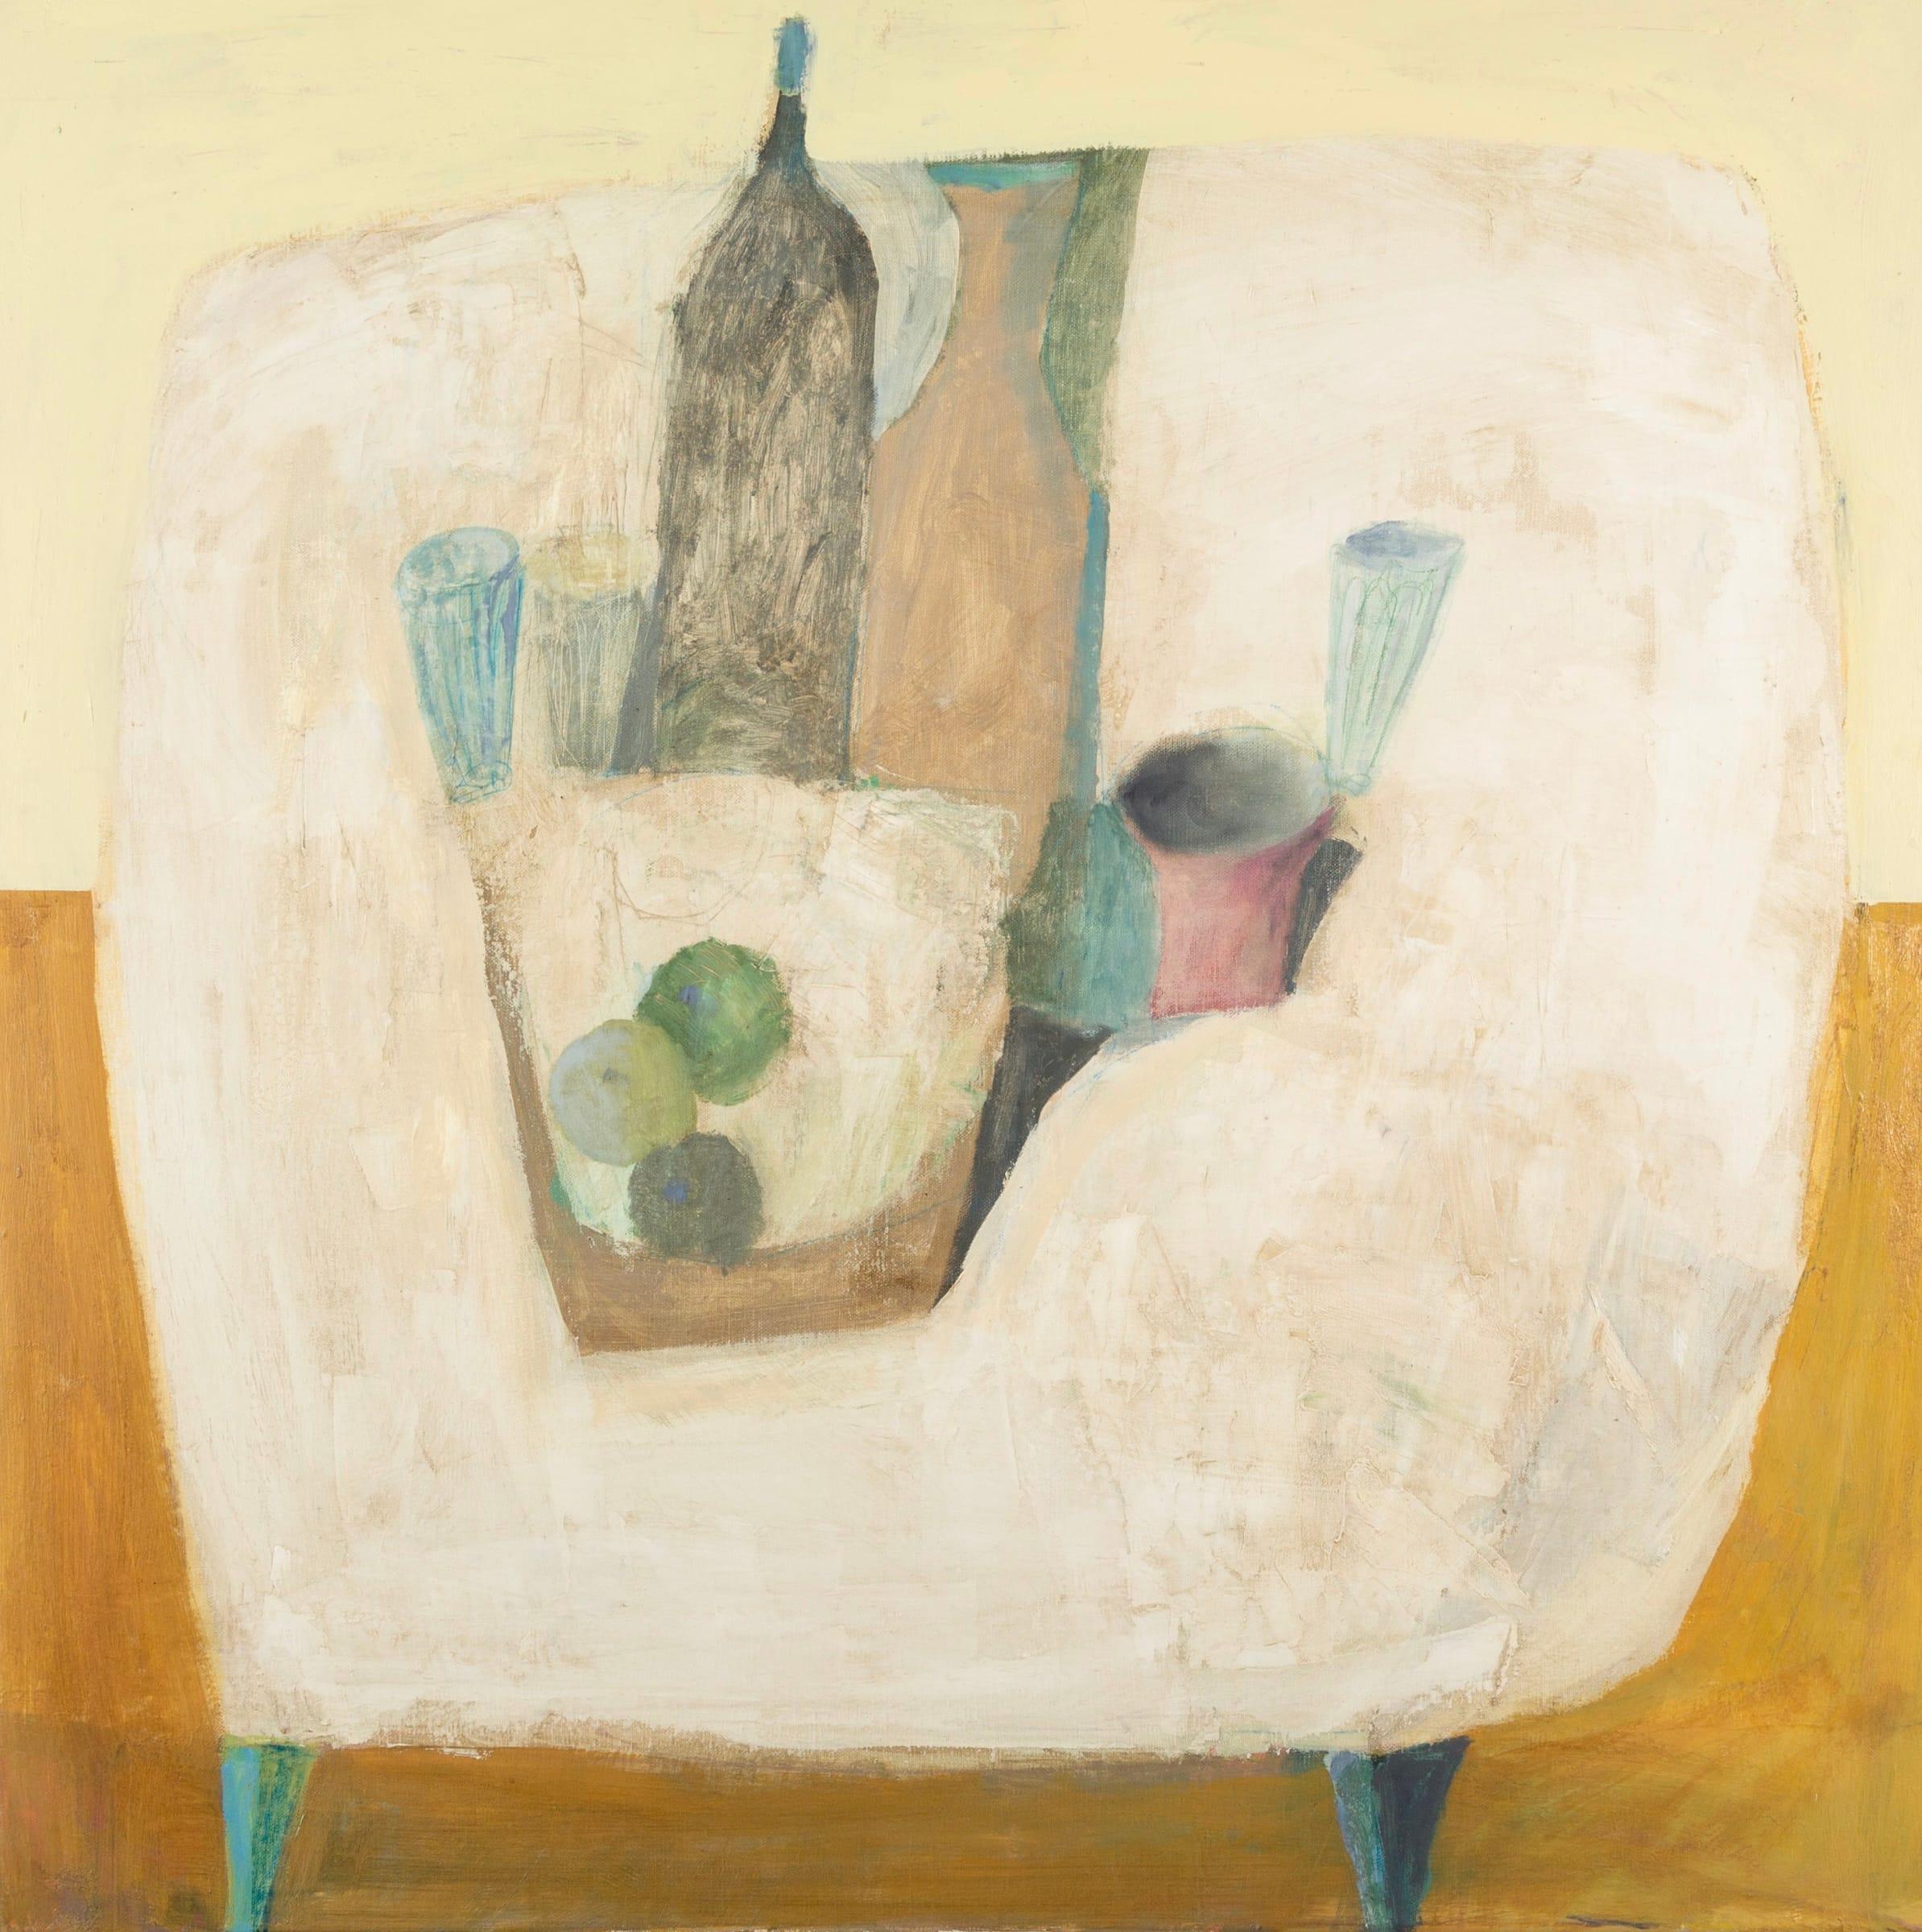 White Table, Oil on Canvas Painting by Nicholas Turner B. 1972, 2022

Additional information:
Medium: Oil on canvas
Dimensions: 80 x 80 cm
31 1/2 x 31 1/2 in
Signed, titled and dated verso

Nicholas Turner is a painter of quiet compositions that are